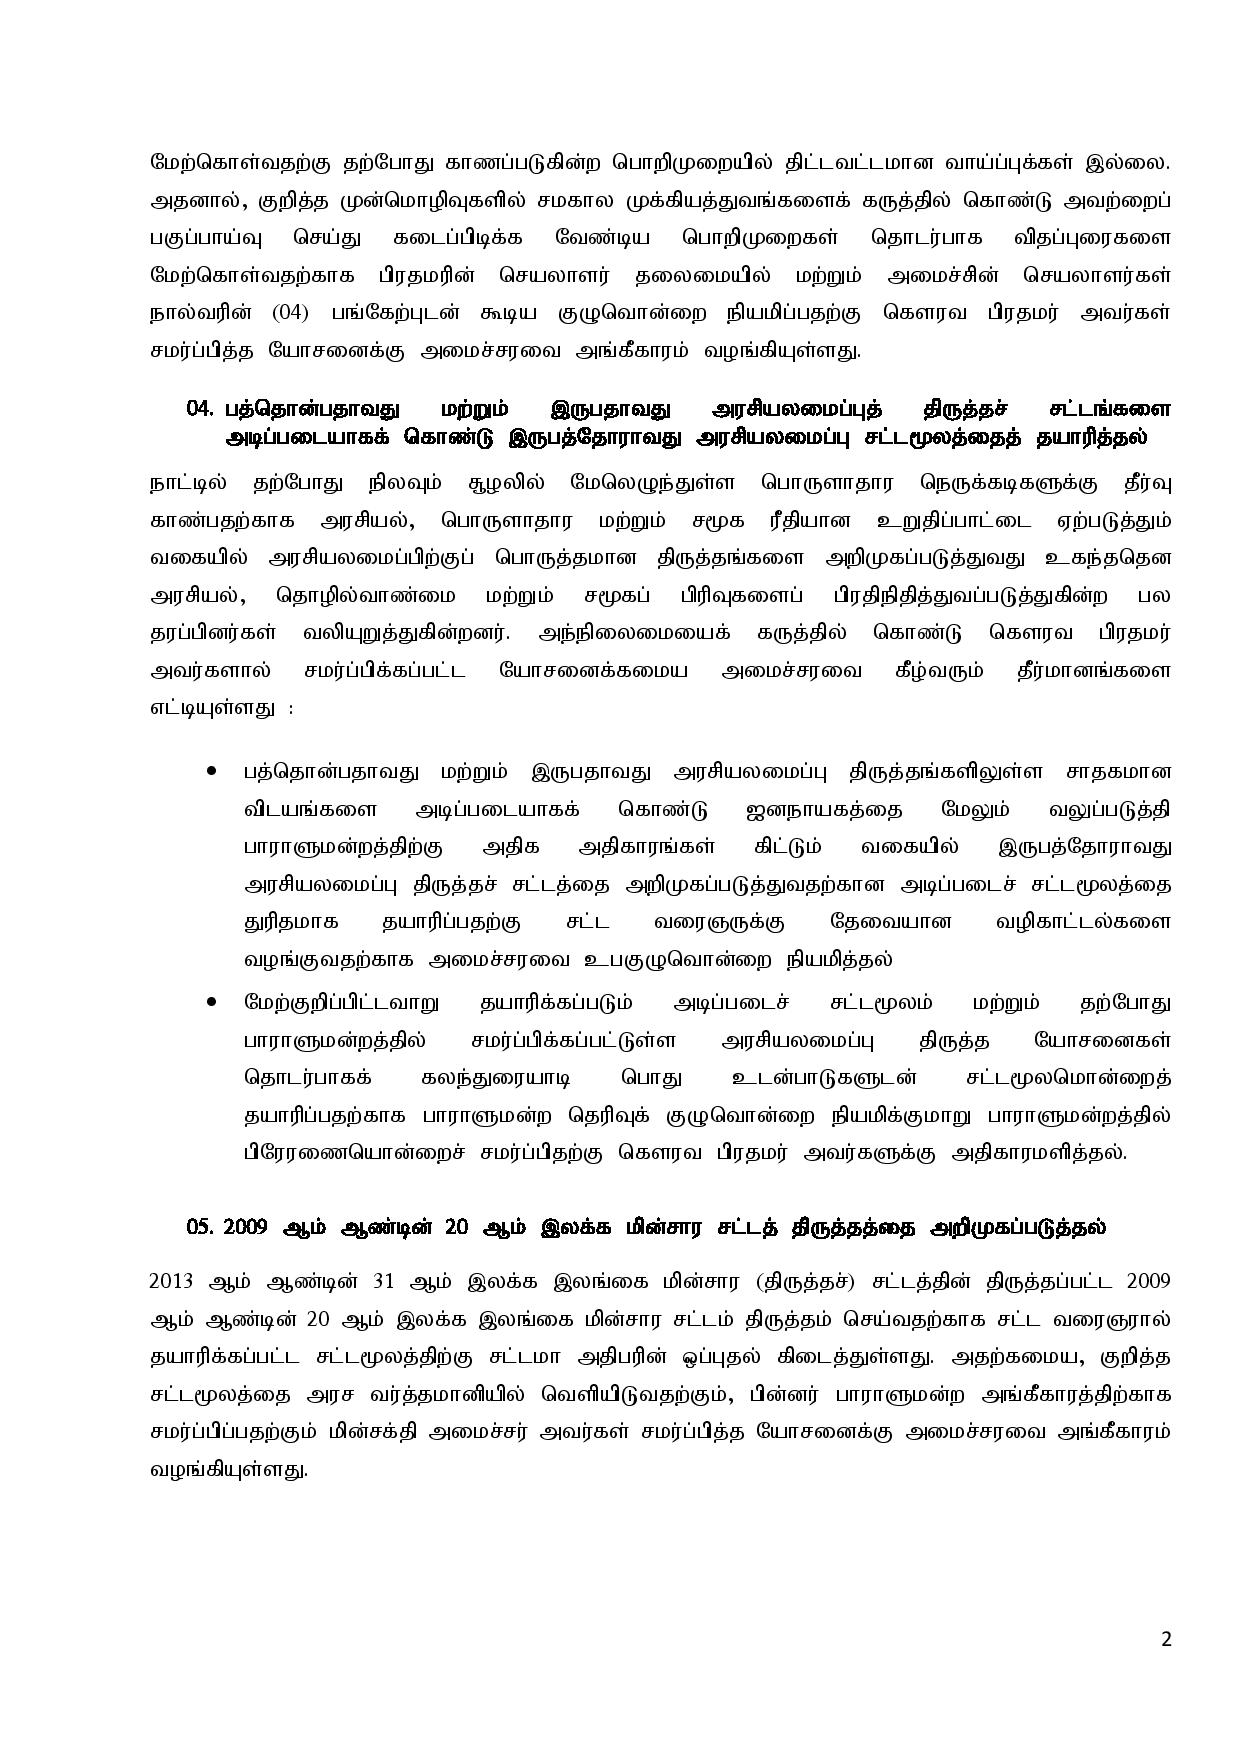 Cabinet Decisions on 25.04.2022 Tamil page 002